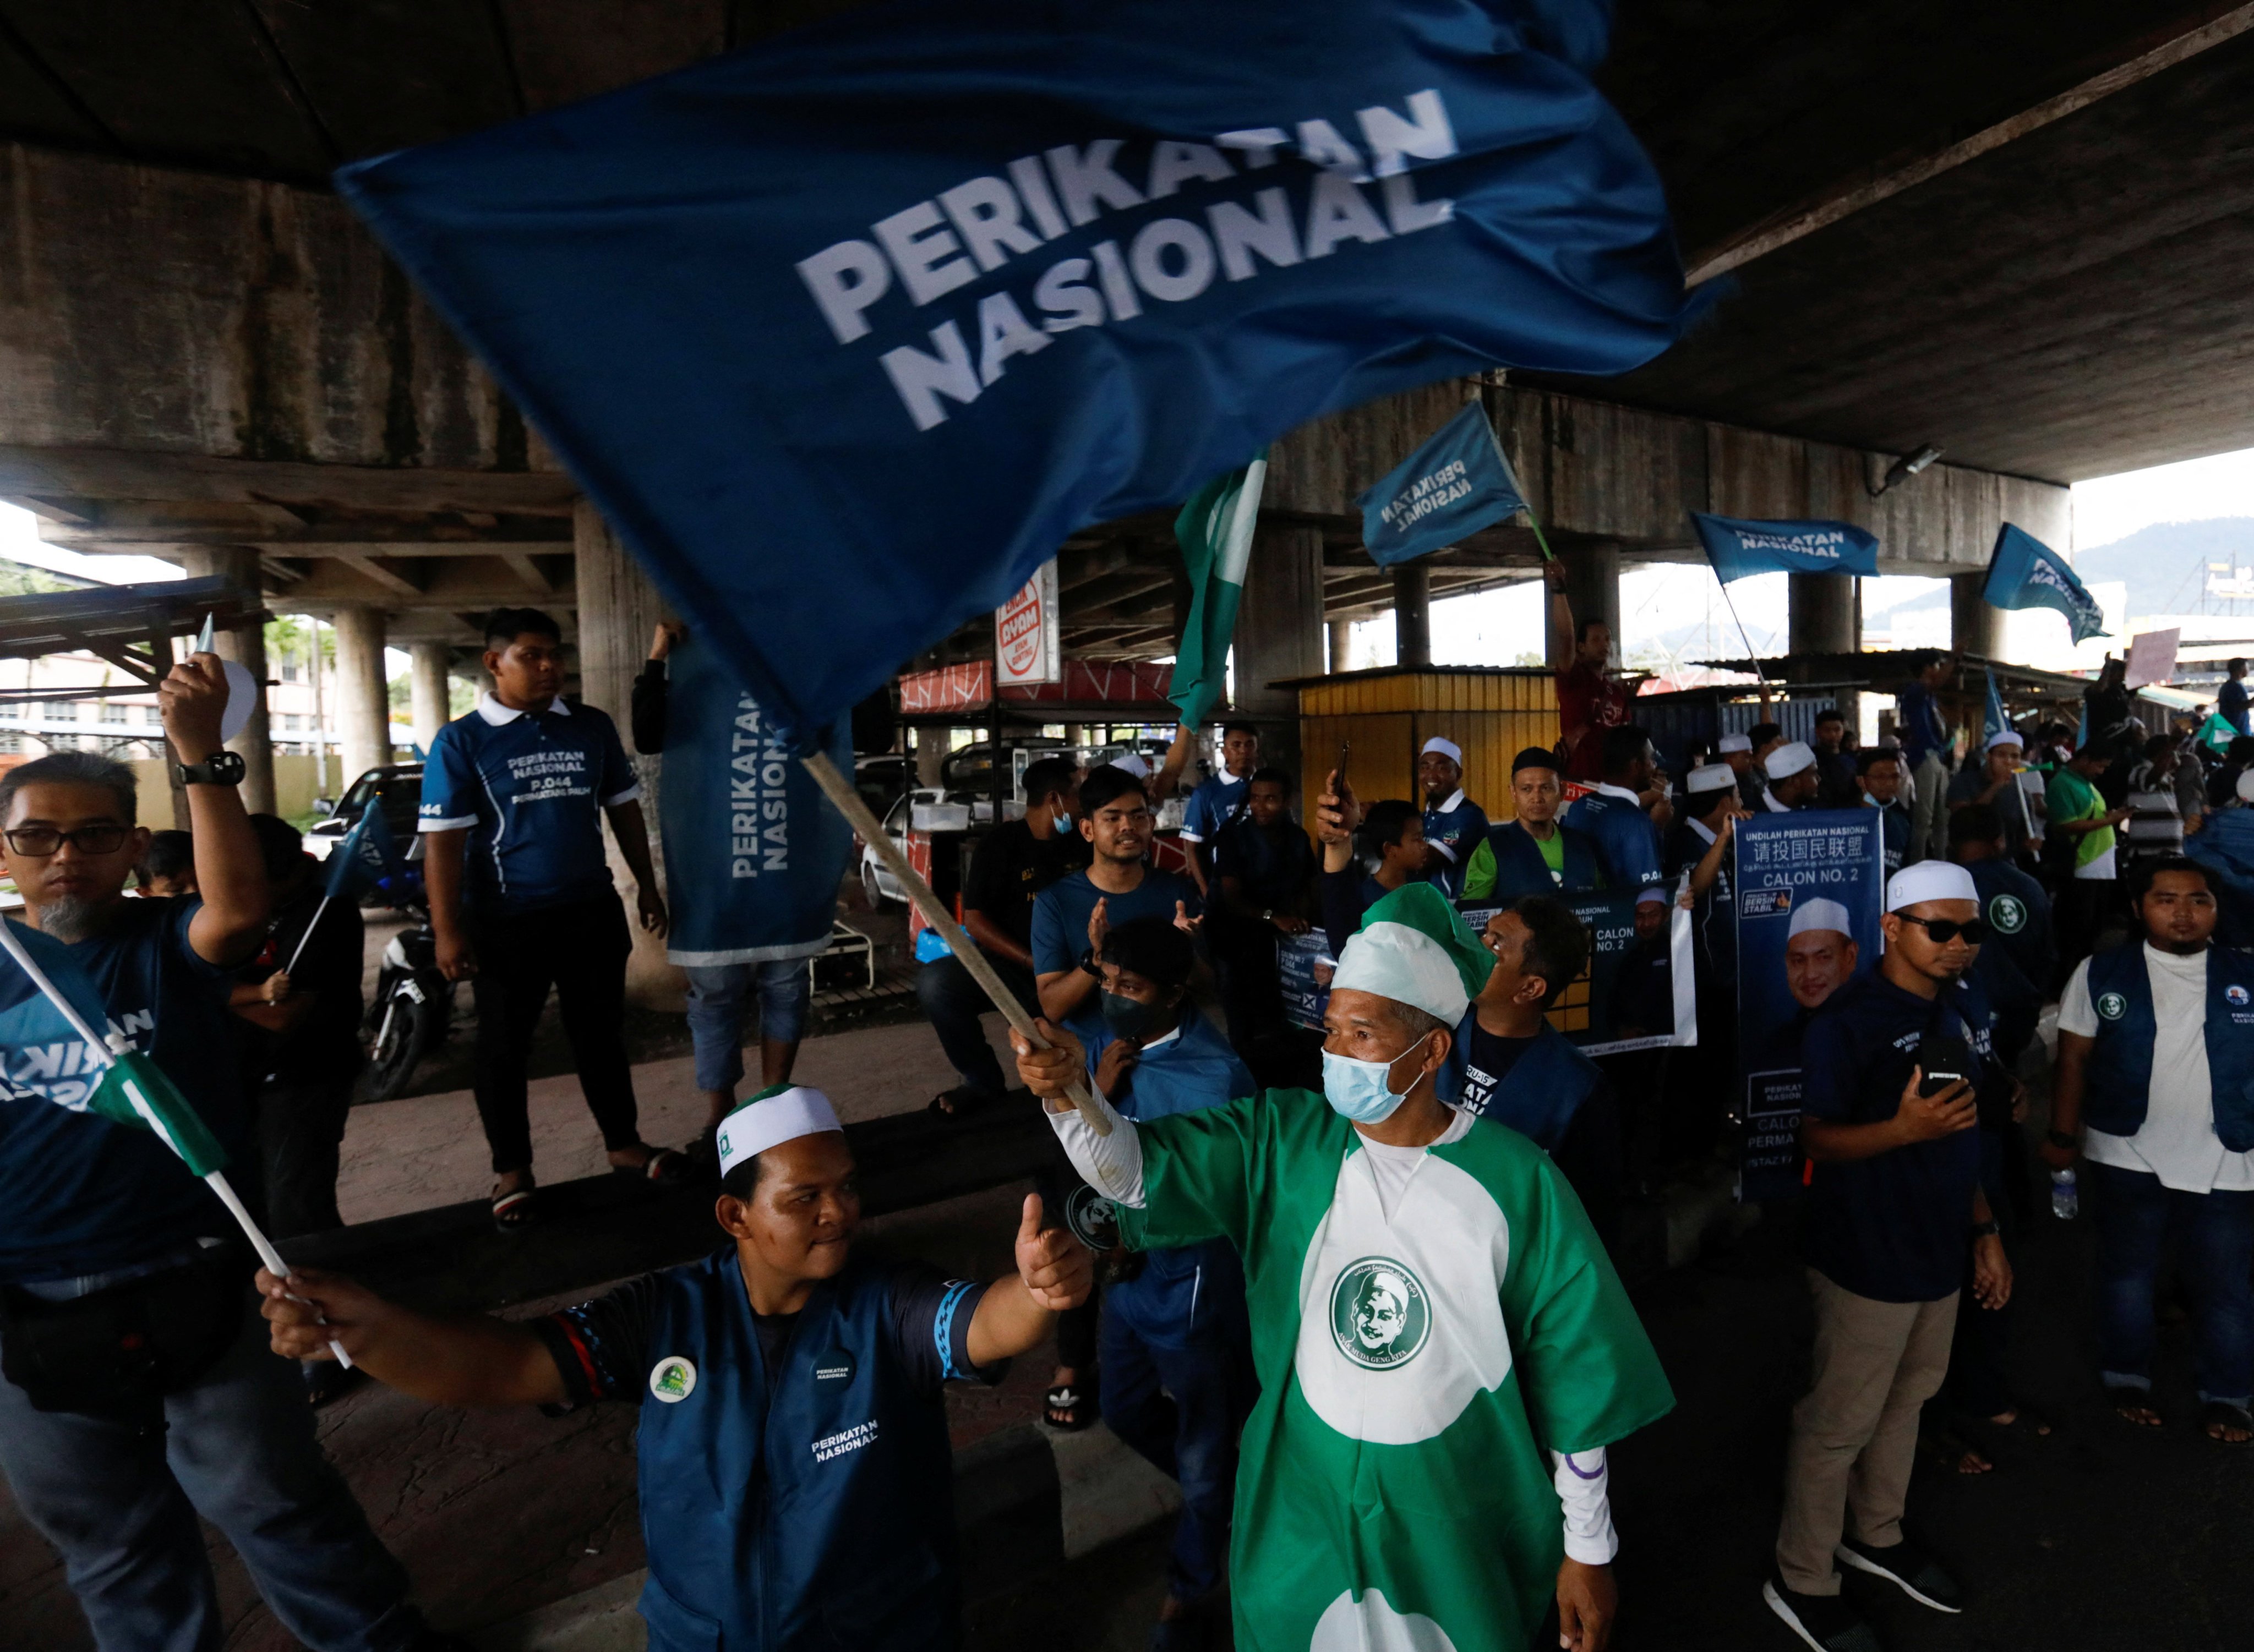 Perikatan Nasional supporters in Penang wave party flags on the eve of Malaysia’s general election. Photo: Reuters